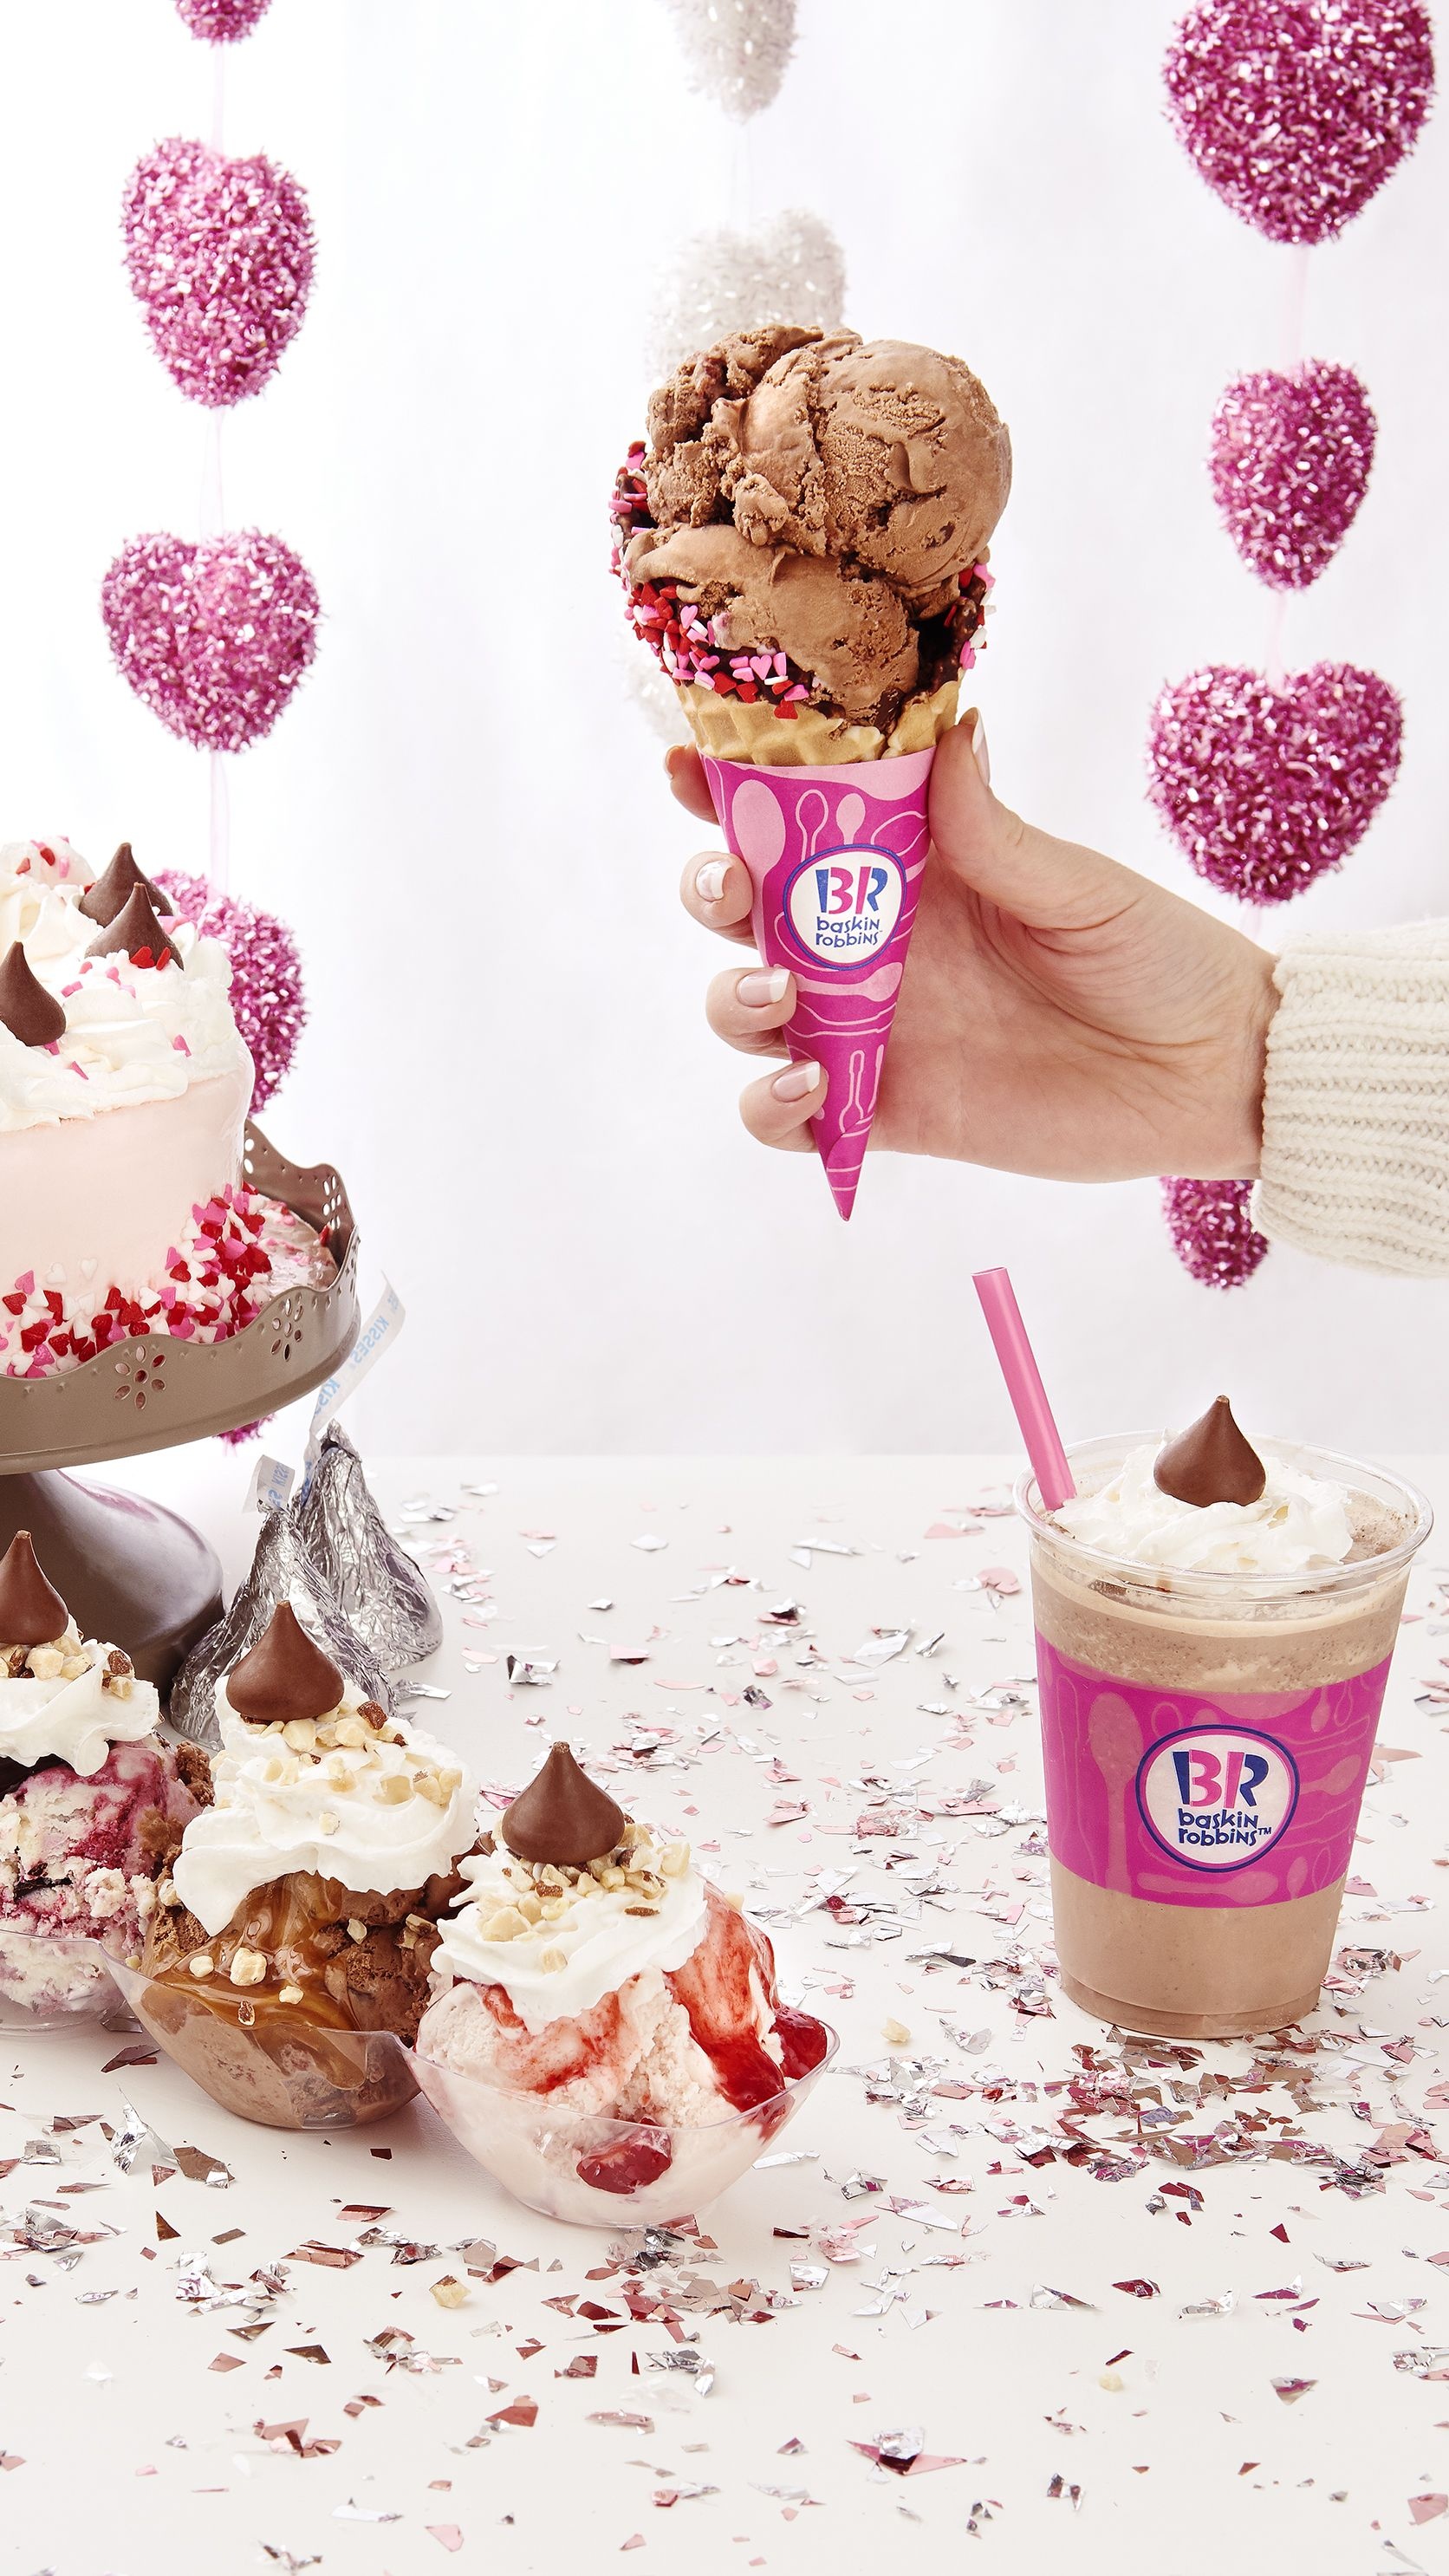 Baskin Robbins: Cherry Cordial, A Chocolate and cherry flavor for Valentine's Day. 1680x2980 HD Background.